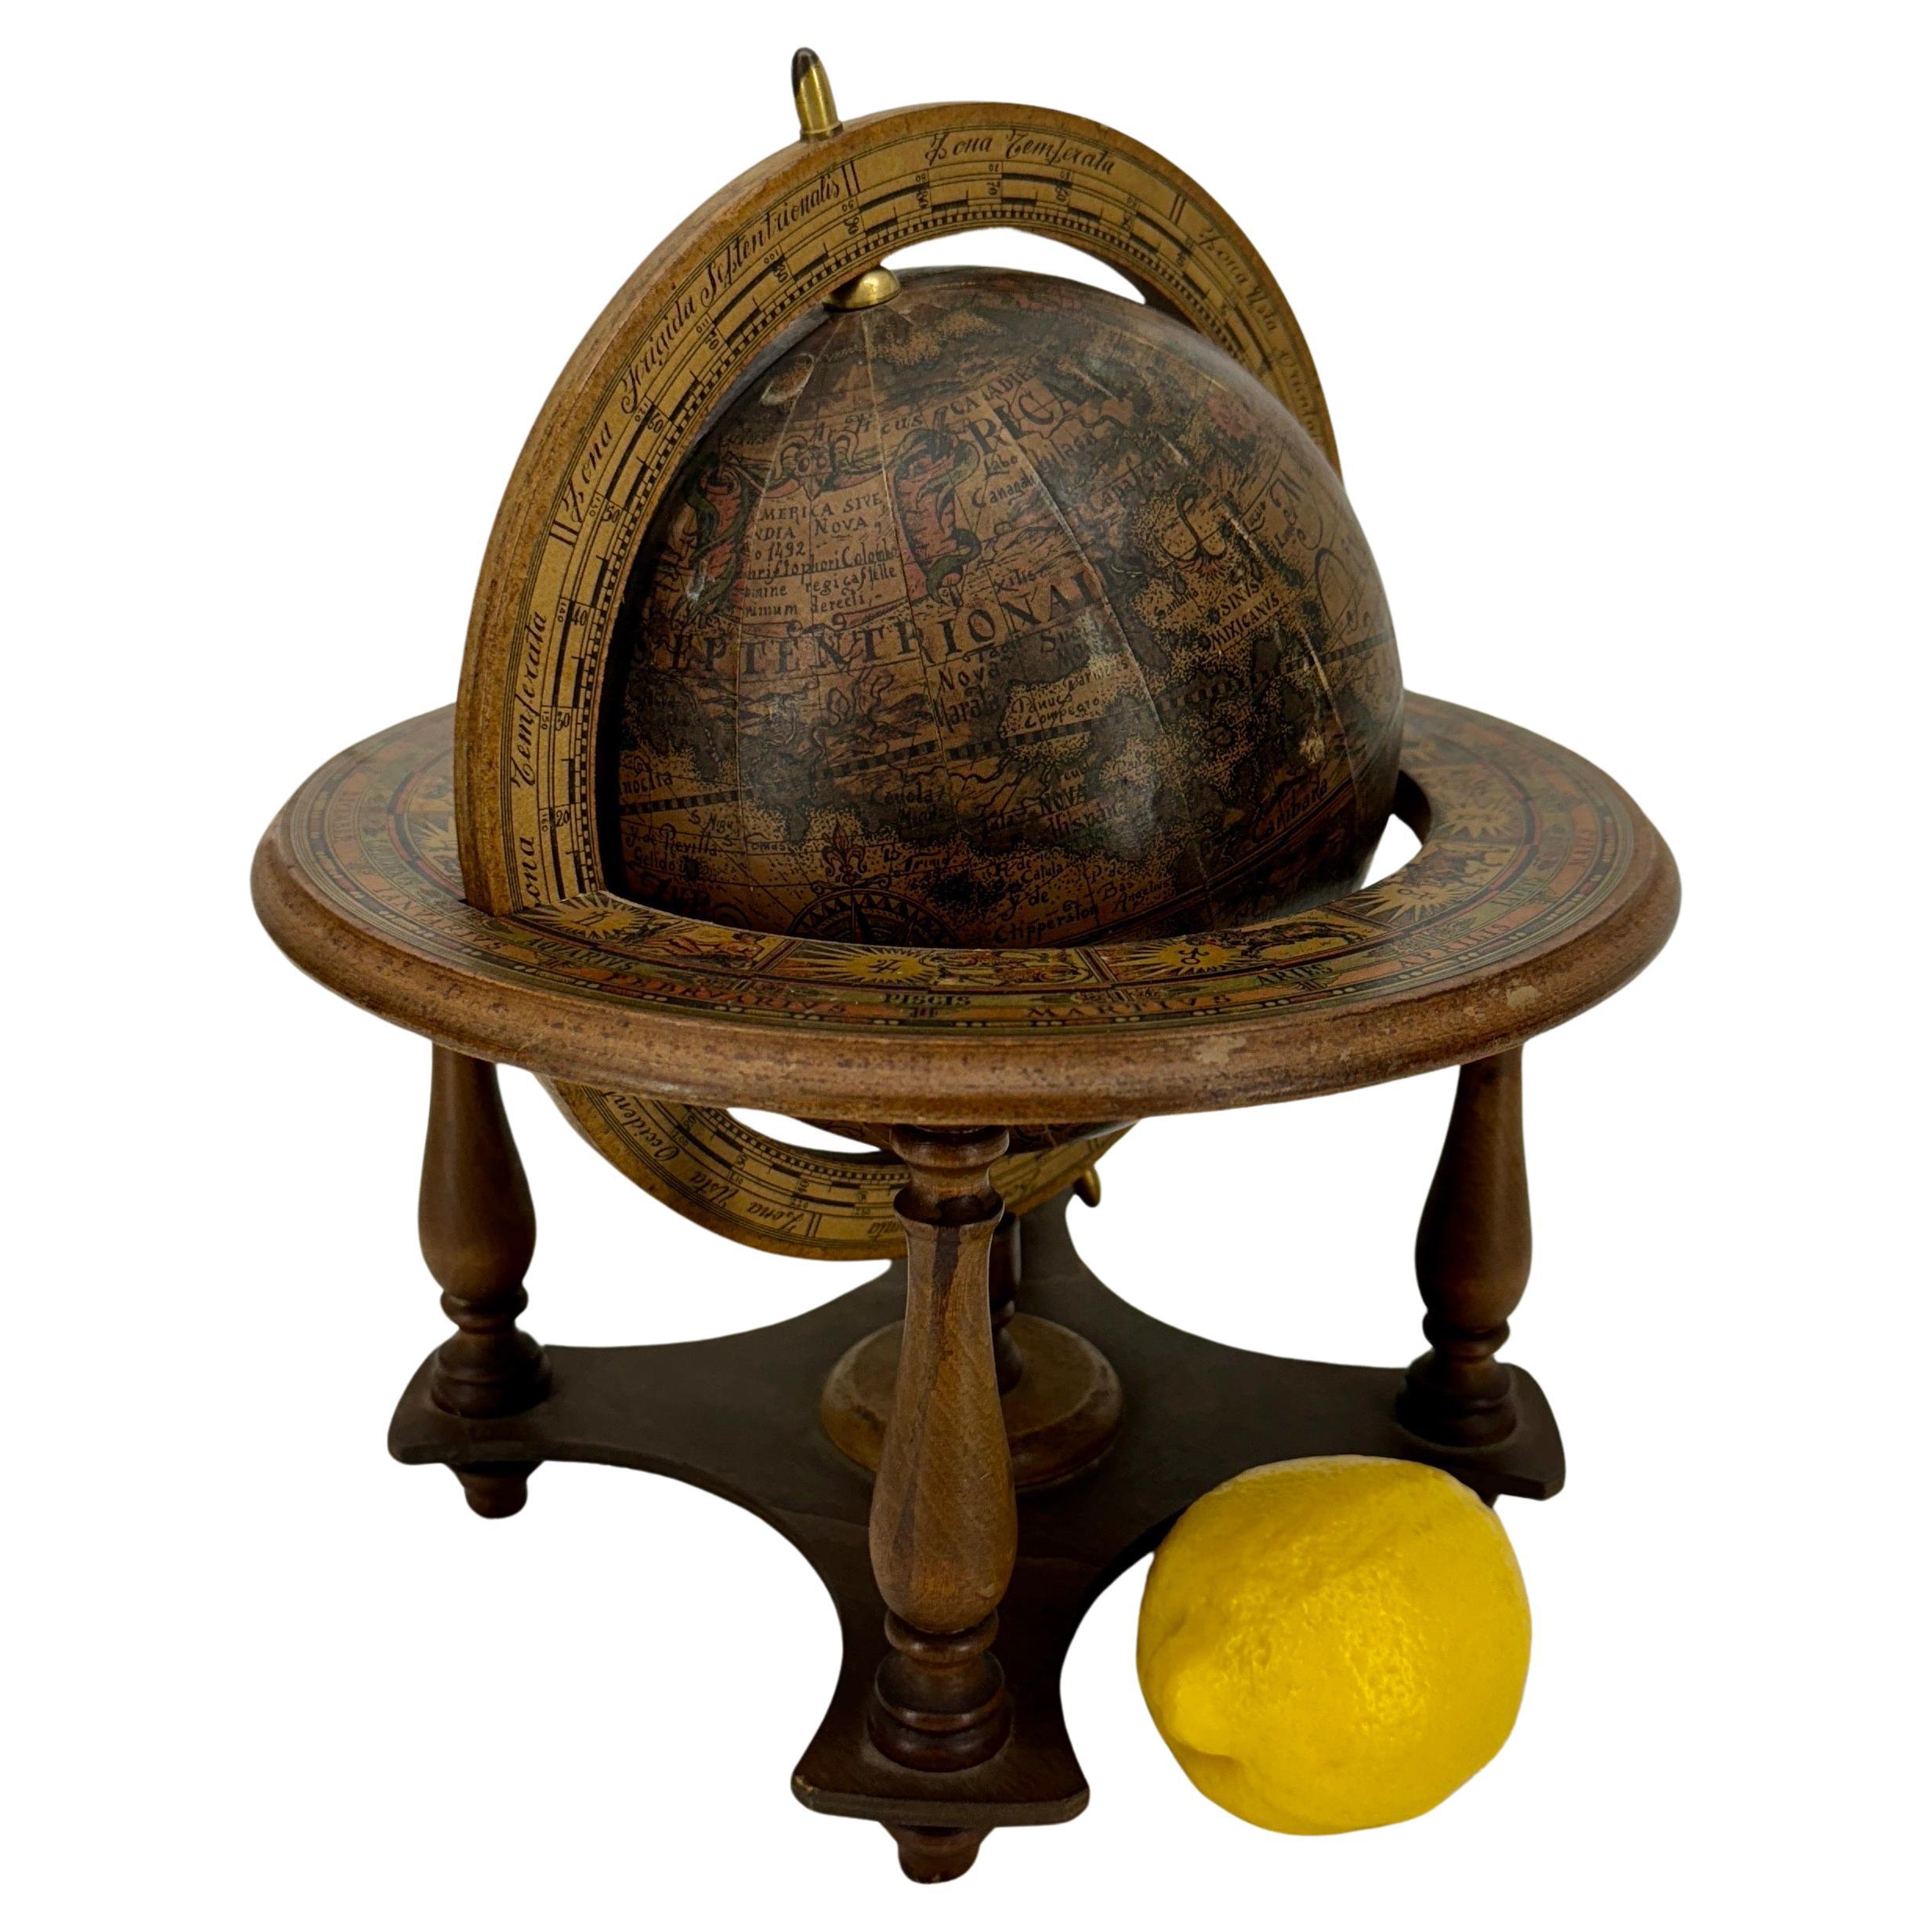 Mid-Size Tabletop Vintage Wooden Spinning Globe, Italy

Charming hand-crafted Mid-Century Modern spinning tabletop globe featuring an antique design sepia brown world map. The globe is beautifully crafted with exquisite detailing including zodiac